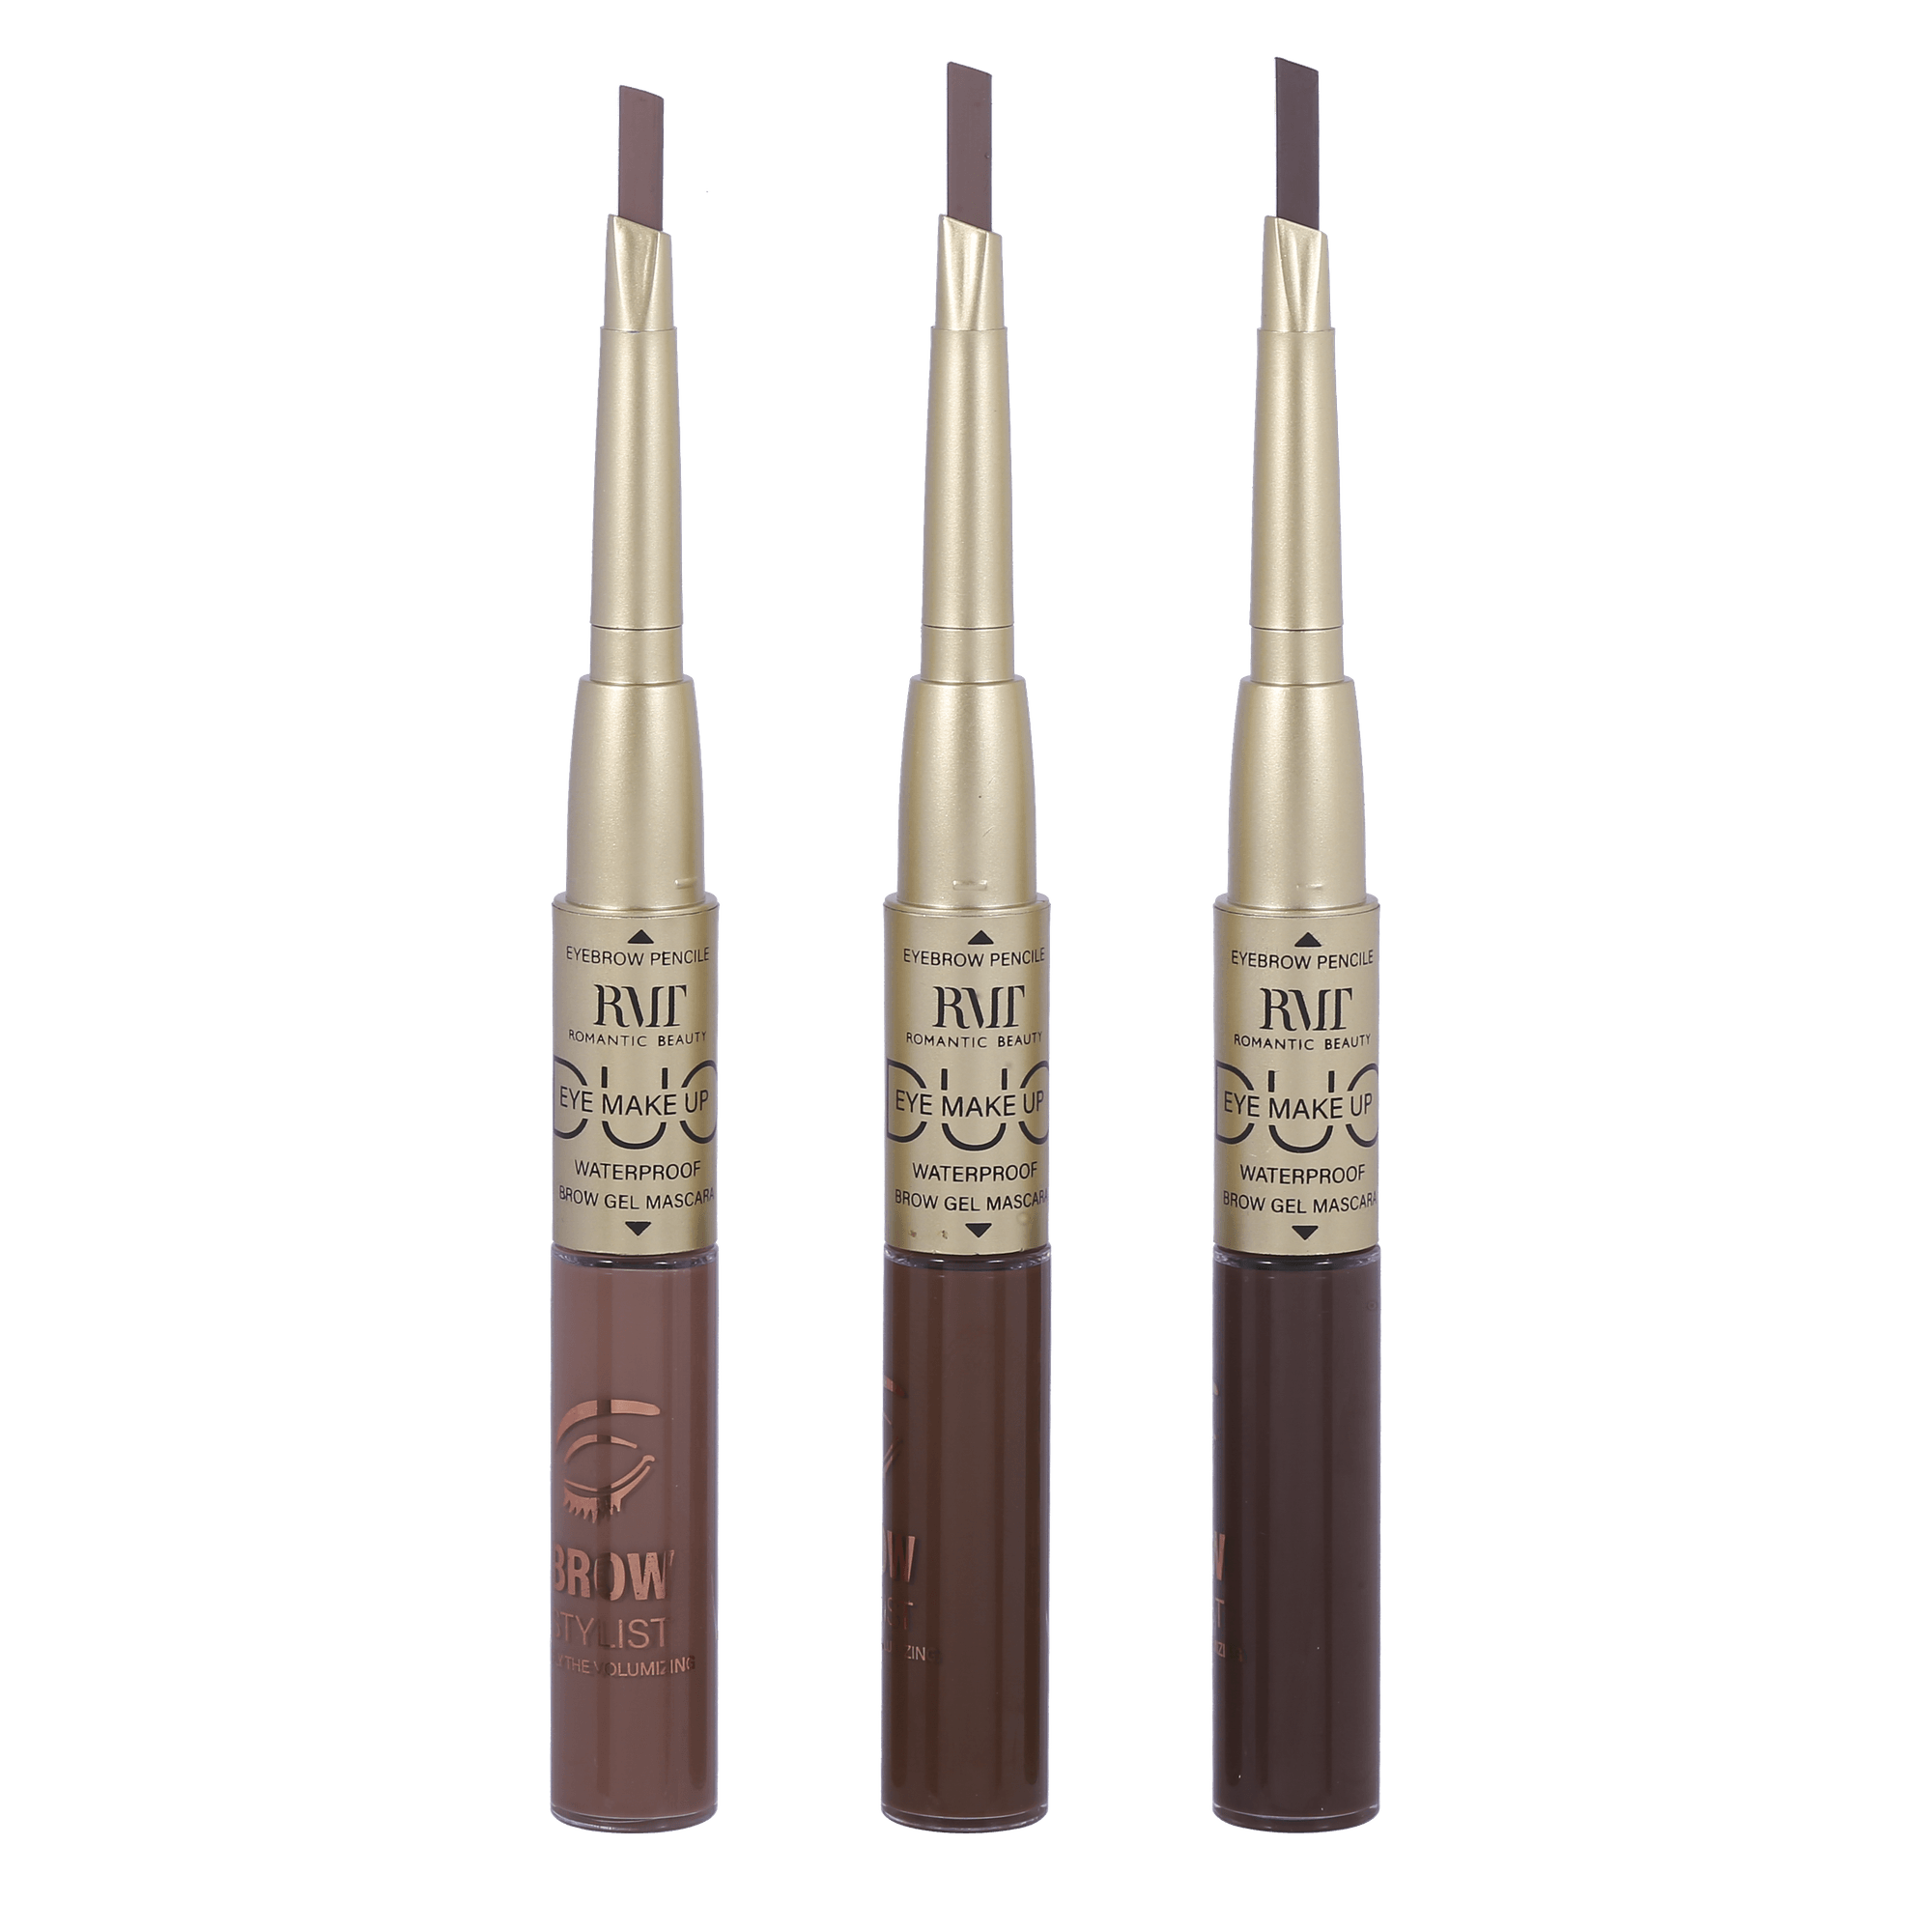 Pack 24 unidades  DUO BROW  PENCILE AND BROW GEL